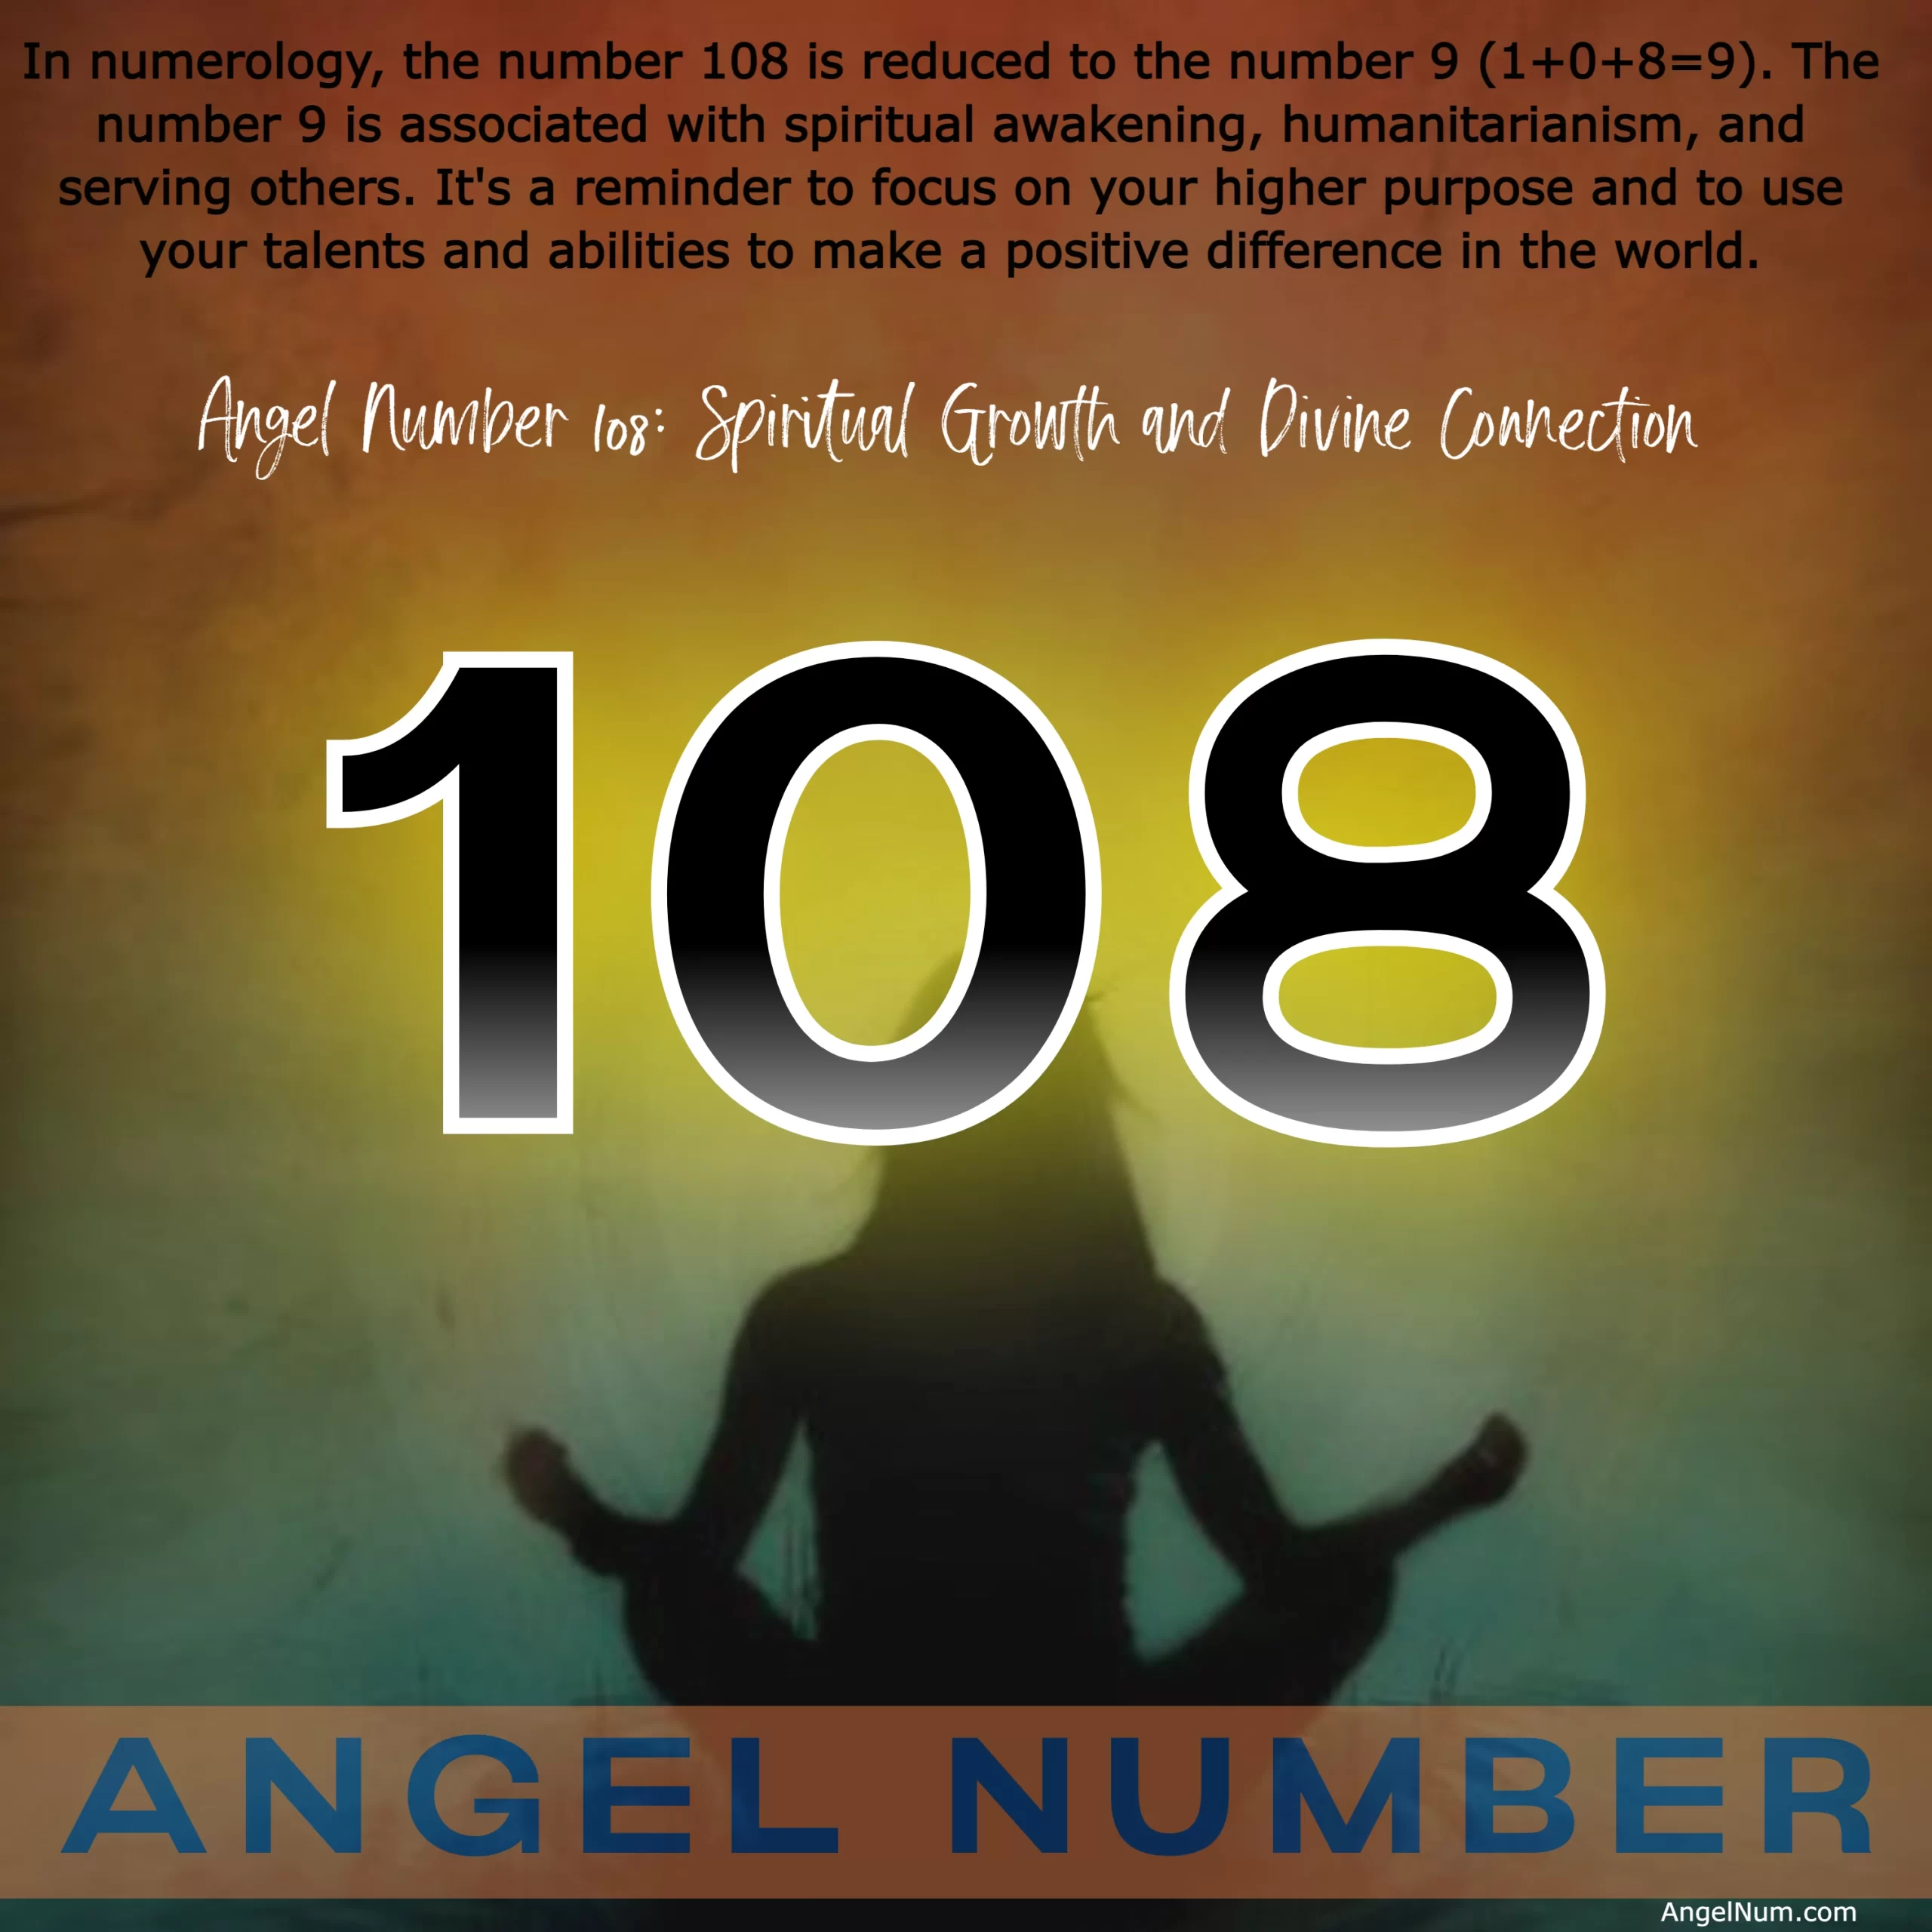 Angel Number 108: Spiritual Growth and Divine Connection